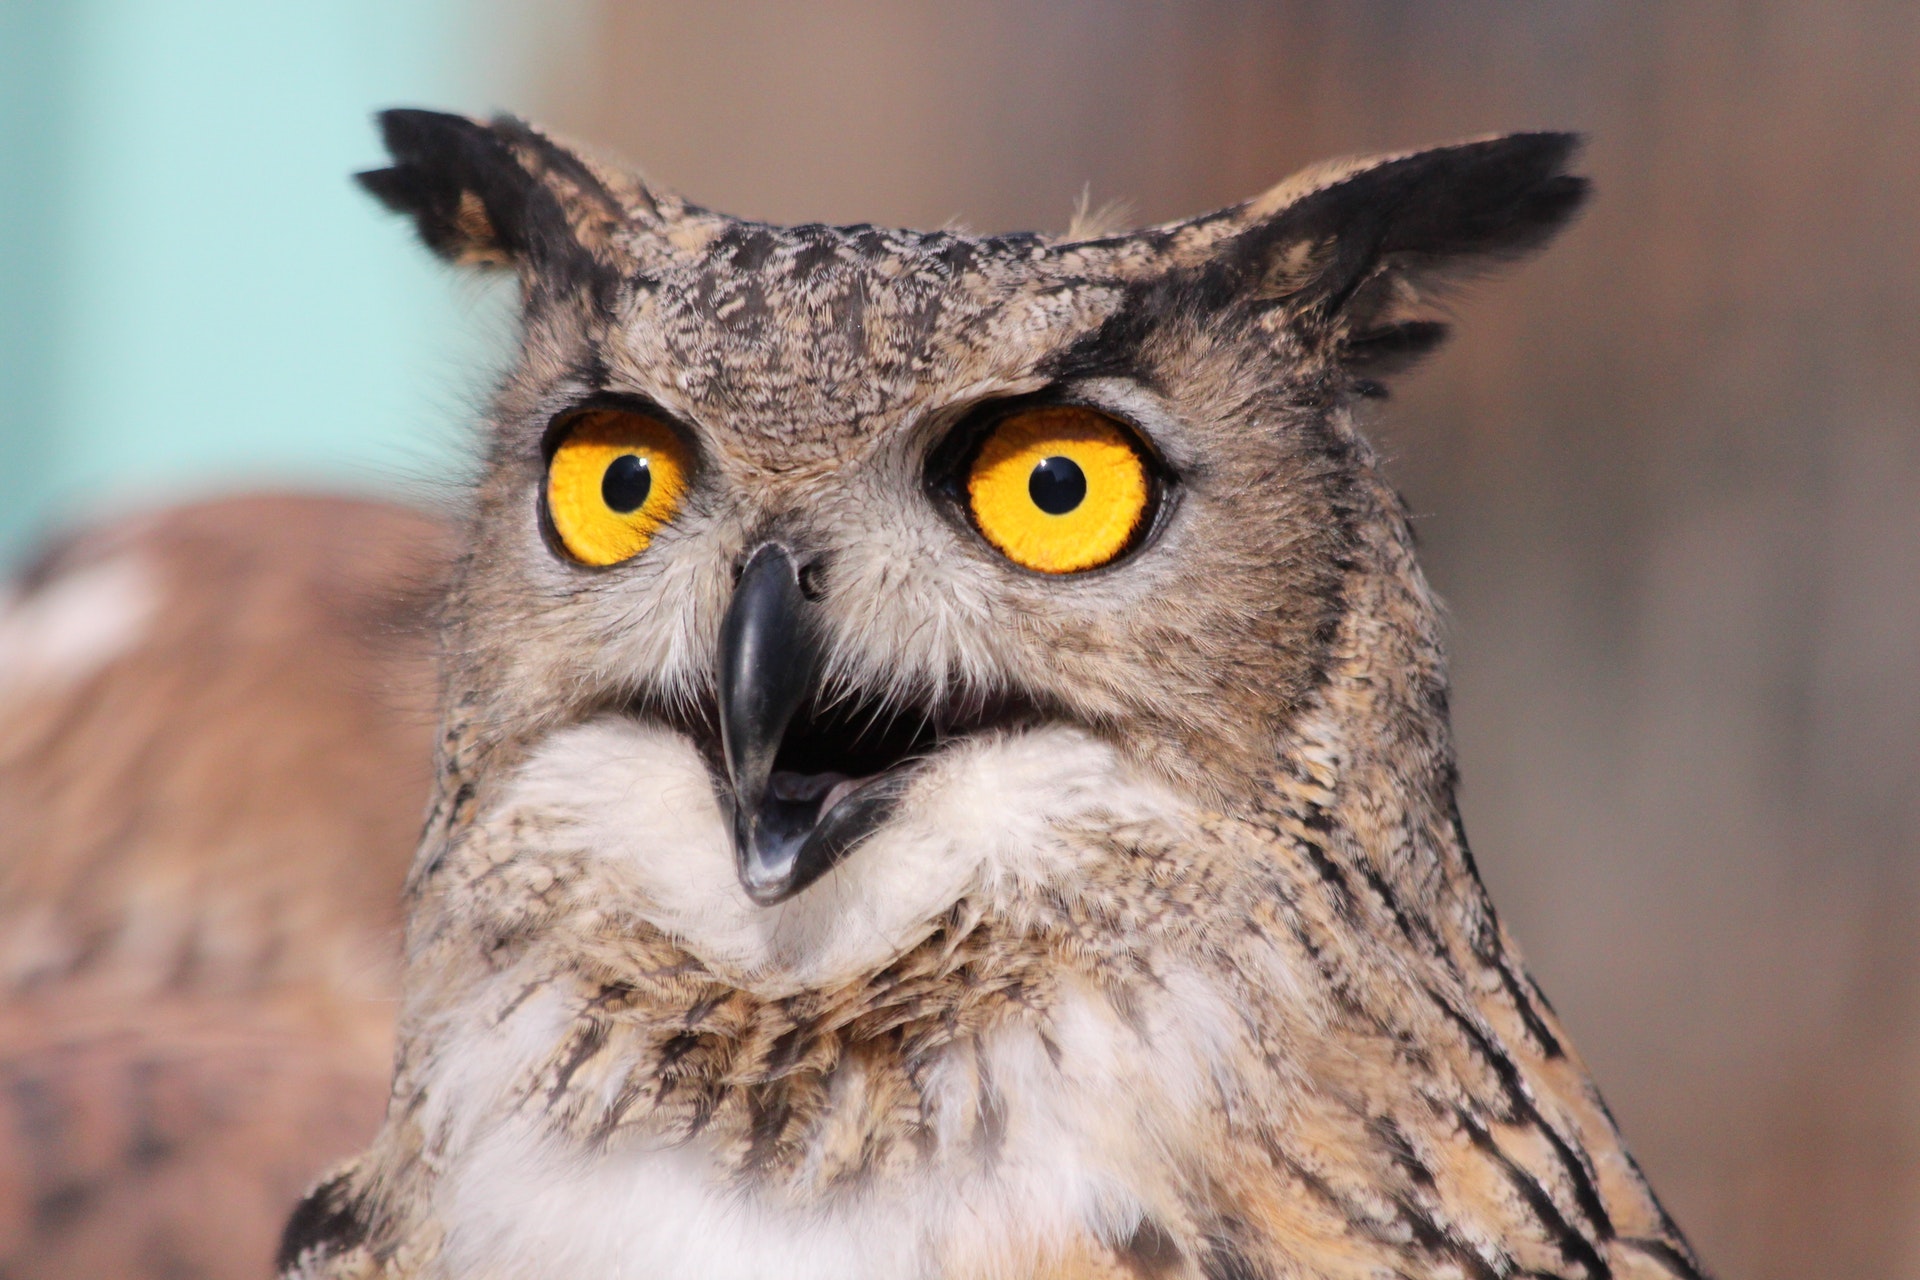 Zoom Big Owl Hd Wallpapers With Yellow Eyes - Surprised Birds - HD Wallpaper 